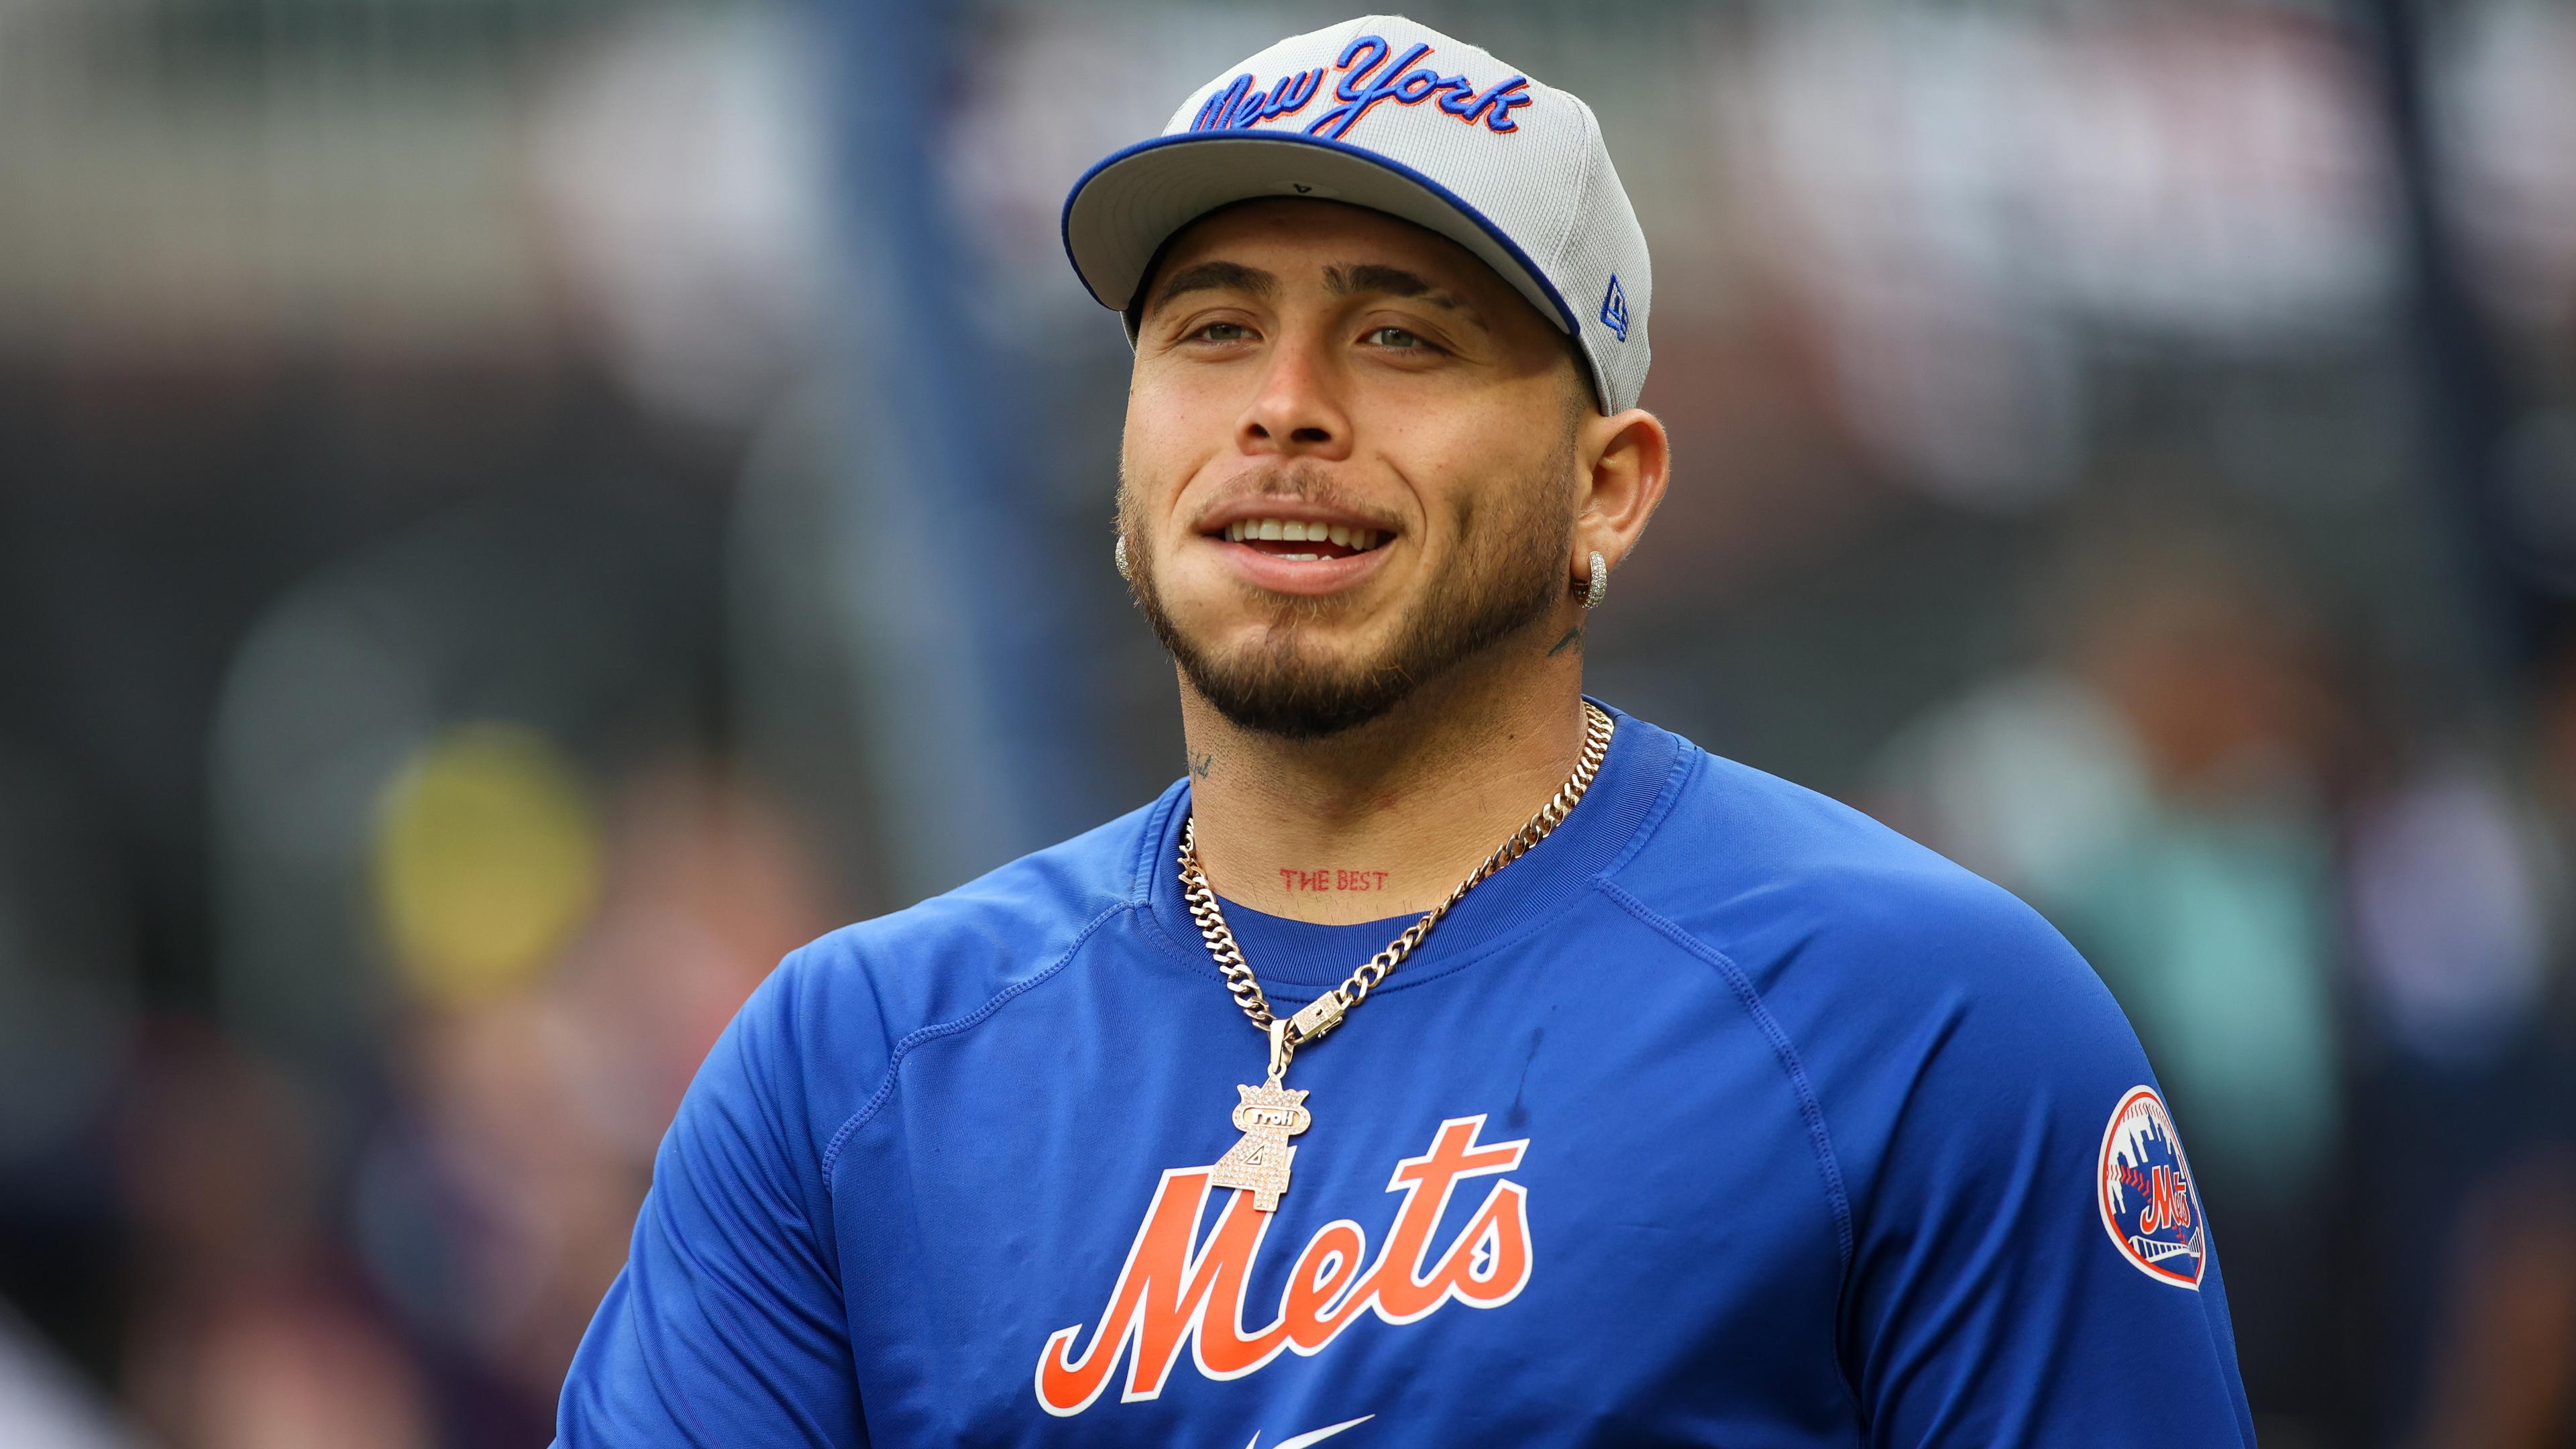 New York Mets catcher Francisco Alvarez (4) before batting practice at Truist Park. The game against the Atlanta Braves was postponed due to impending weather. / Brett Davis-USA TODAY